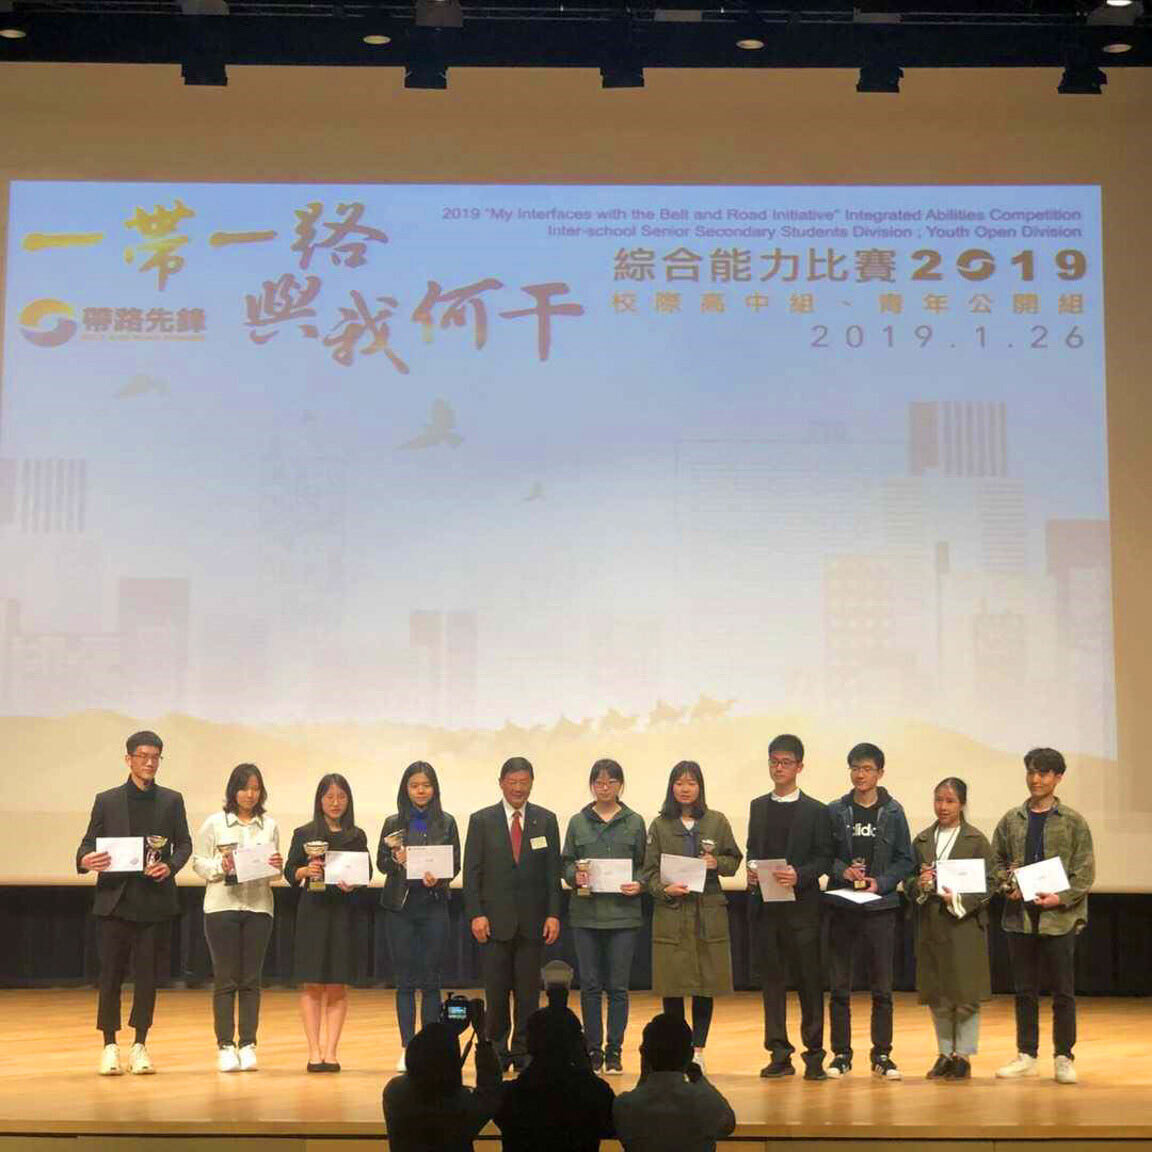 BBA Finance student triumphs in Belt and Road competition